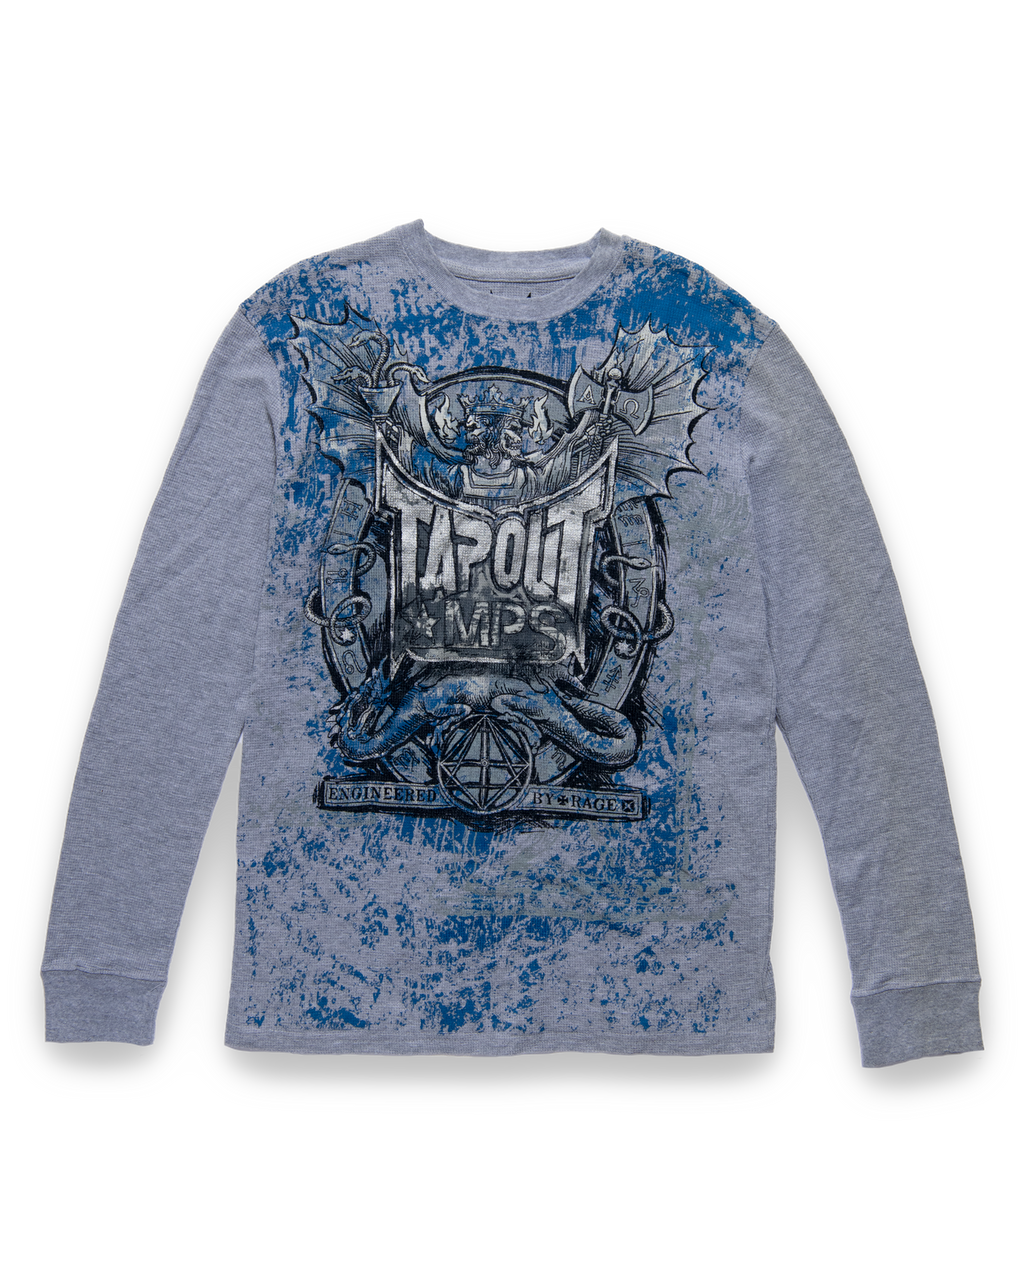 TAPOUT Long Sleeve Shirt